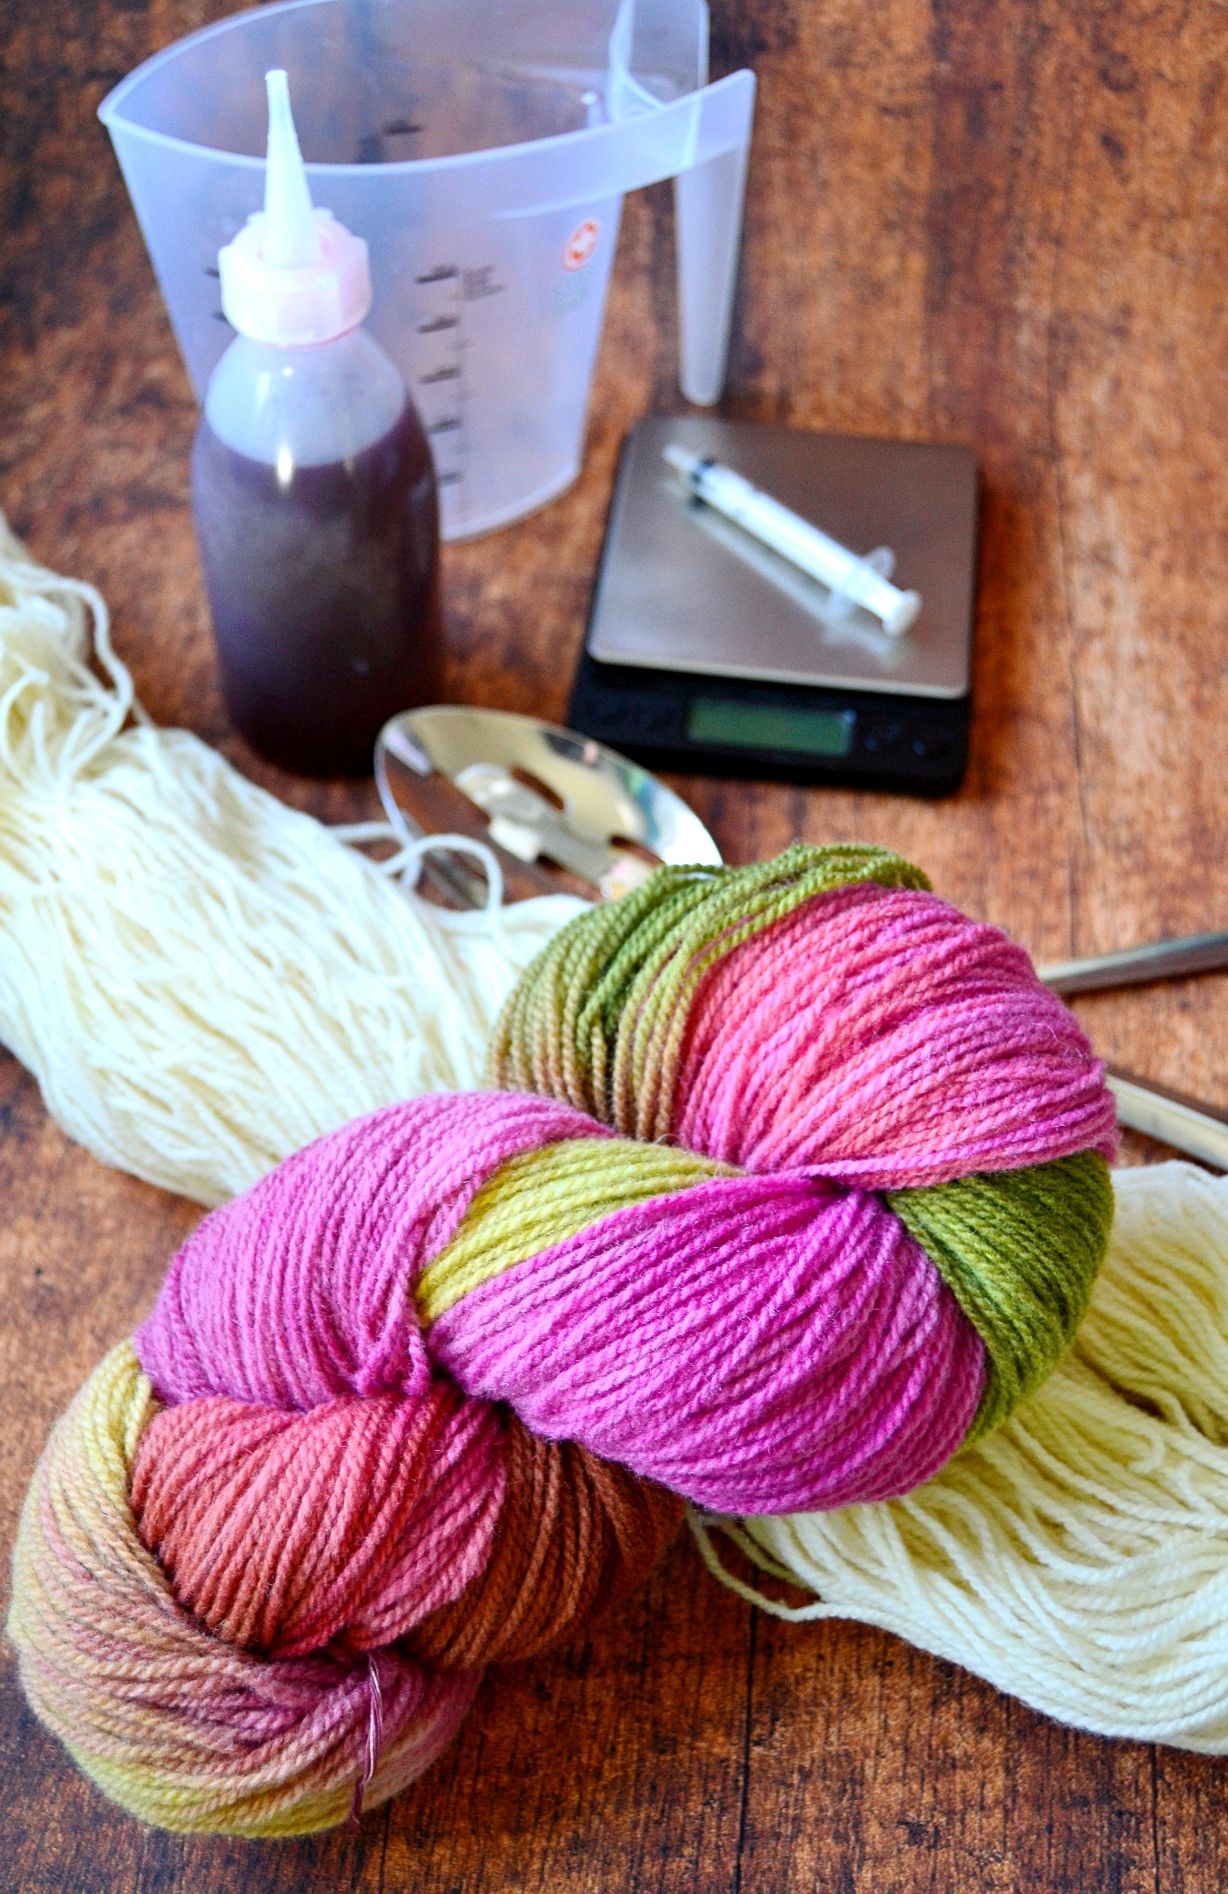 Hand-dyed wool and tools of the trade